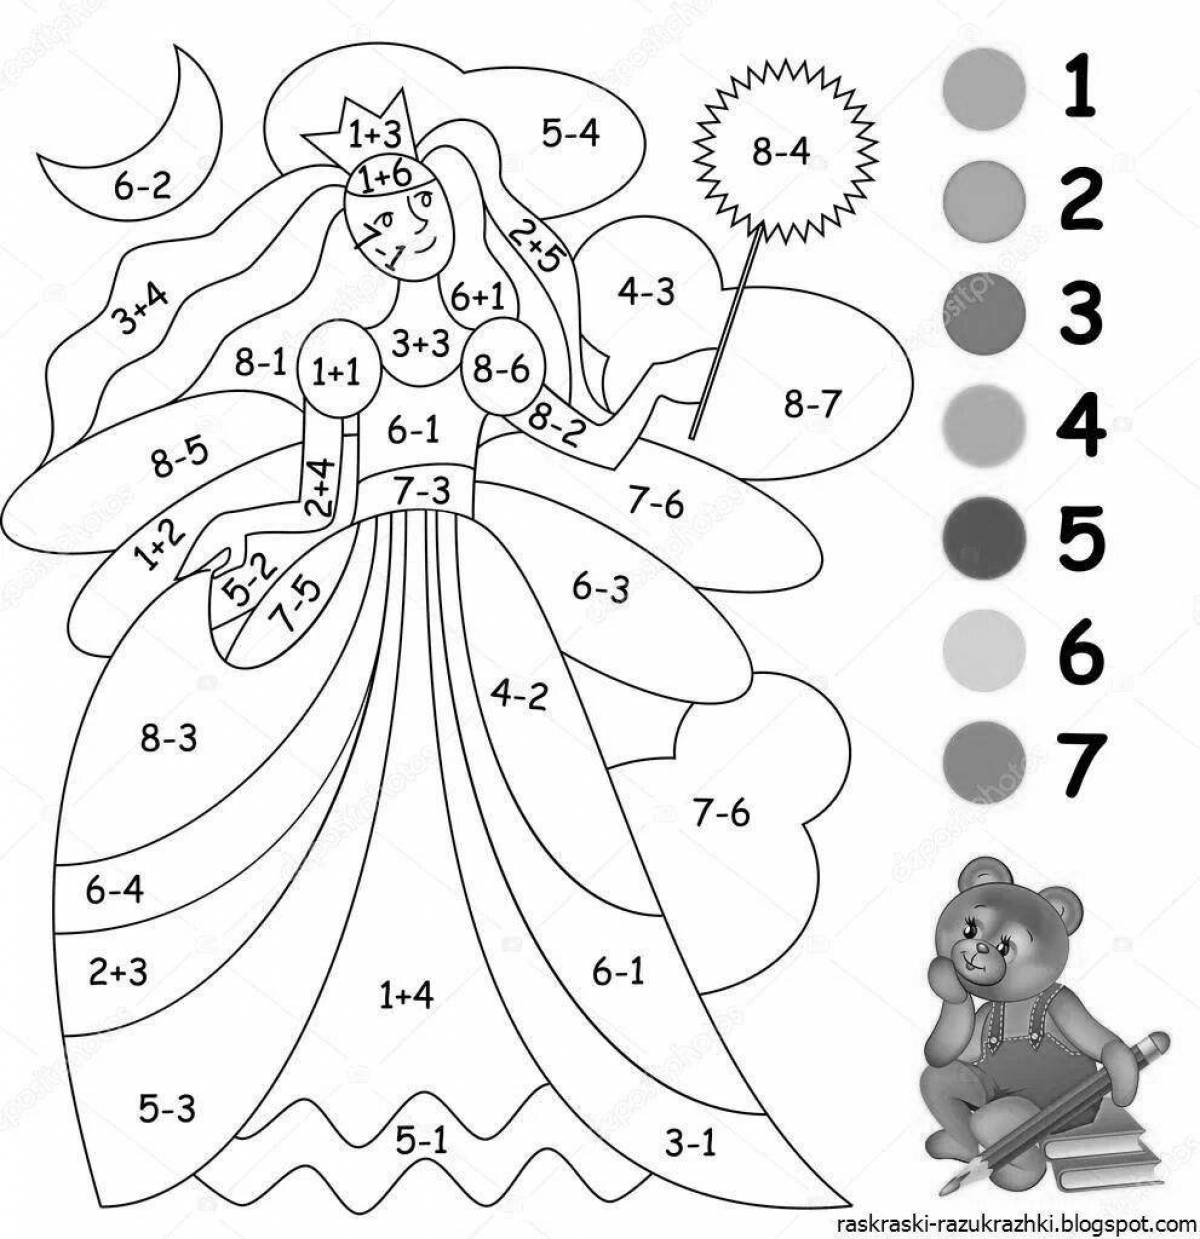 Interactive math by numbers for kids 5-7 years old